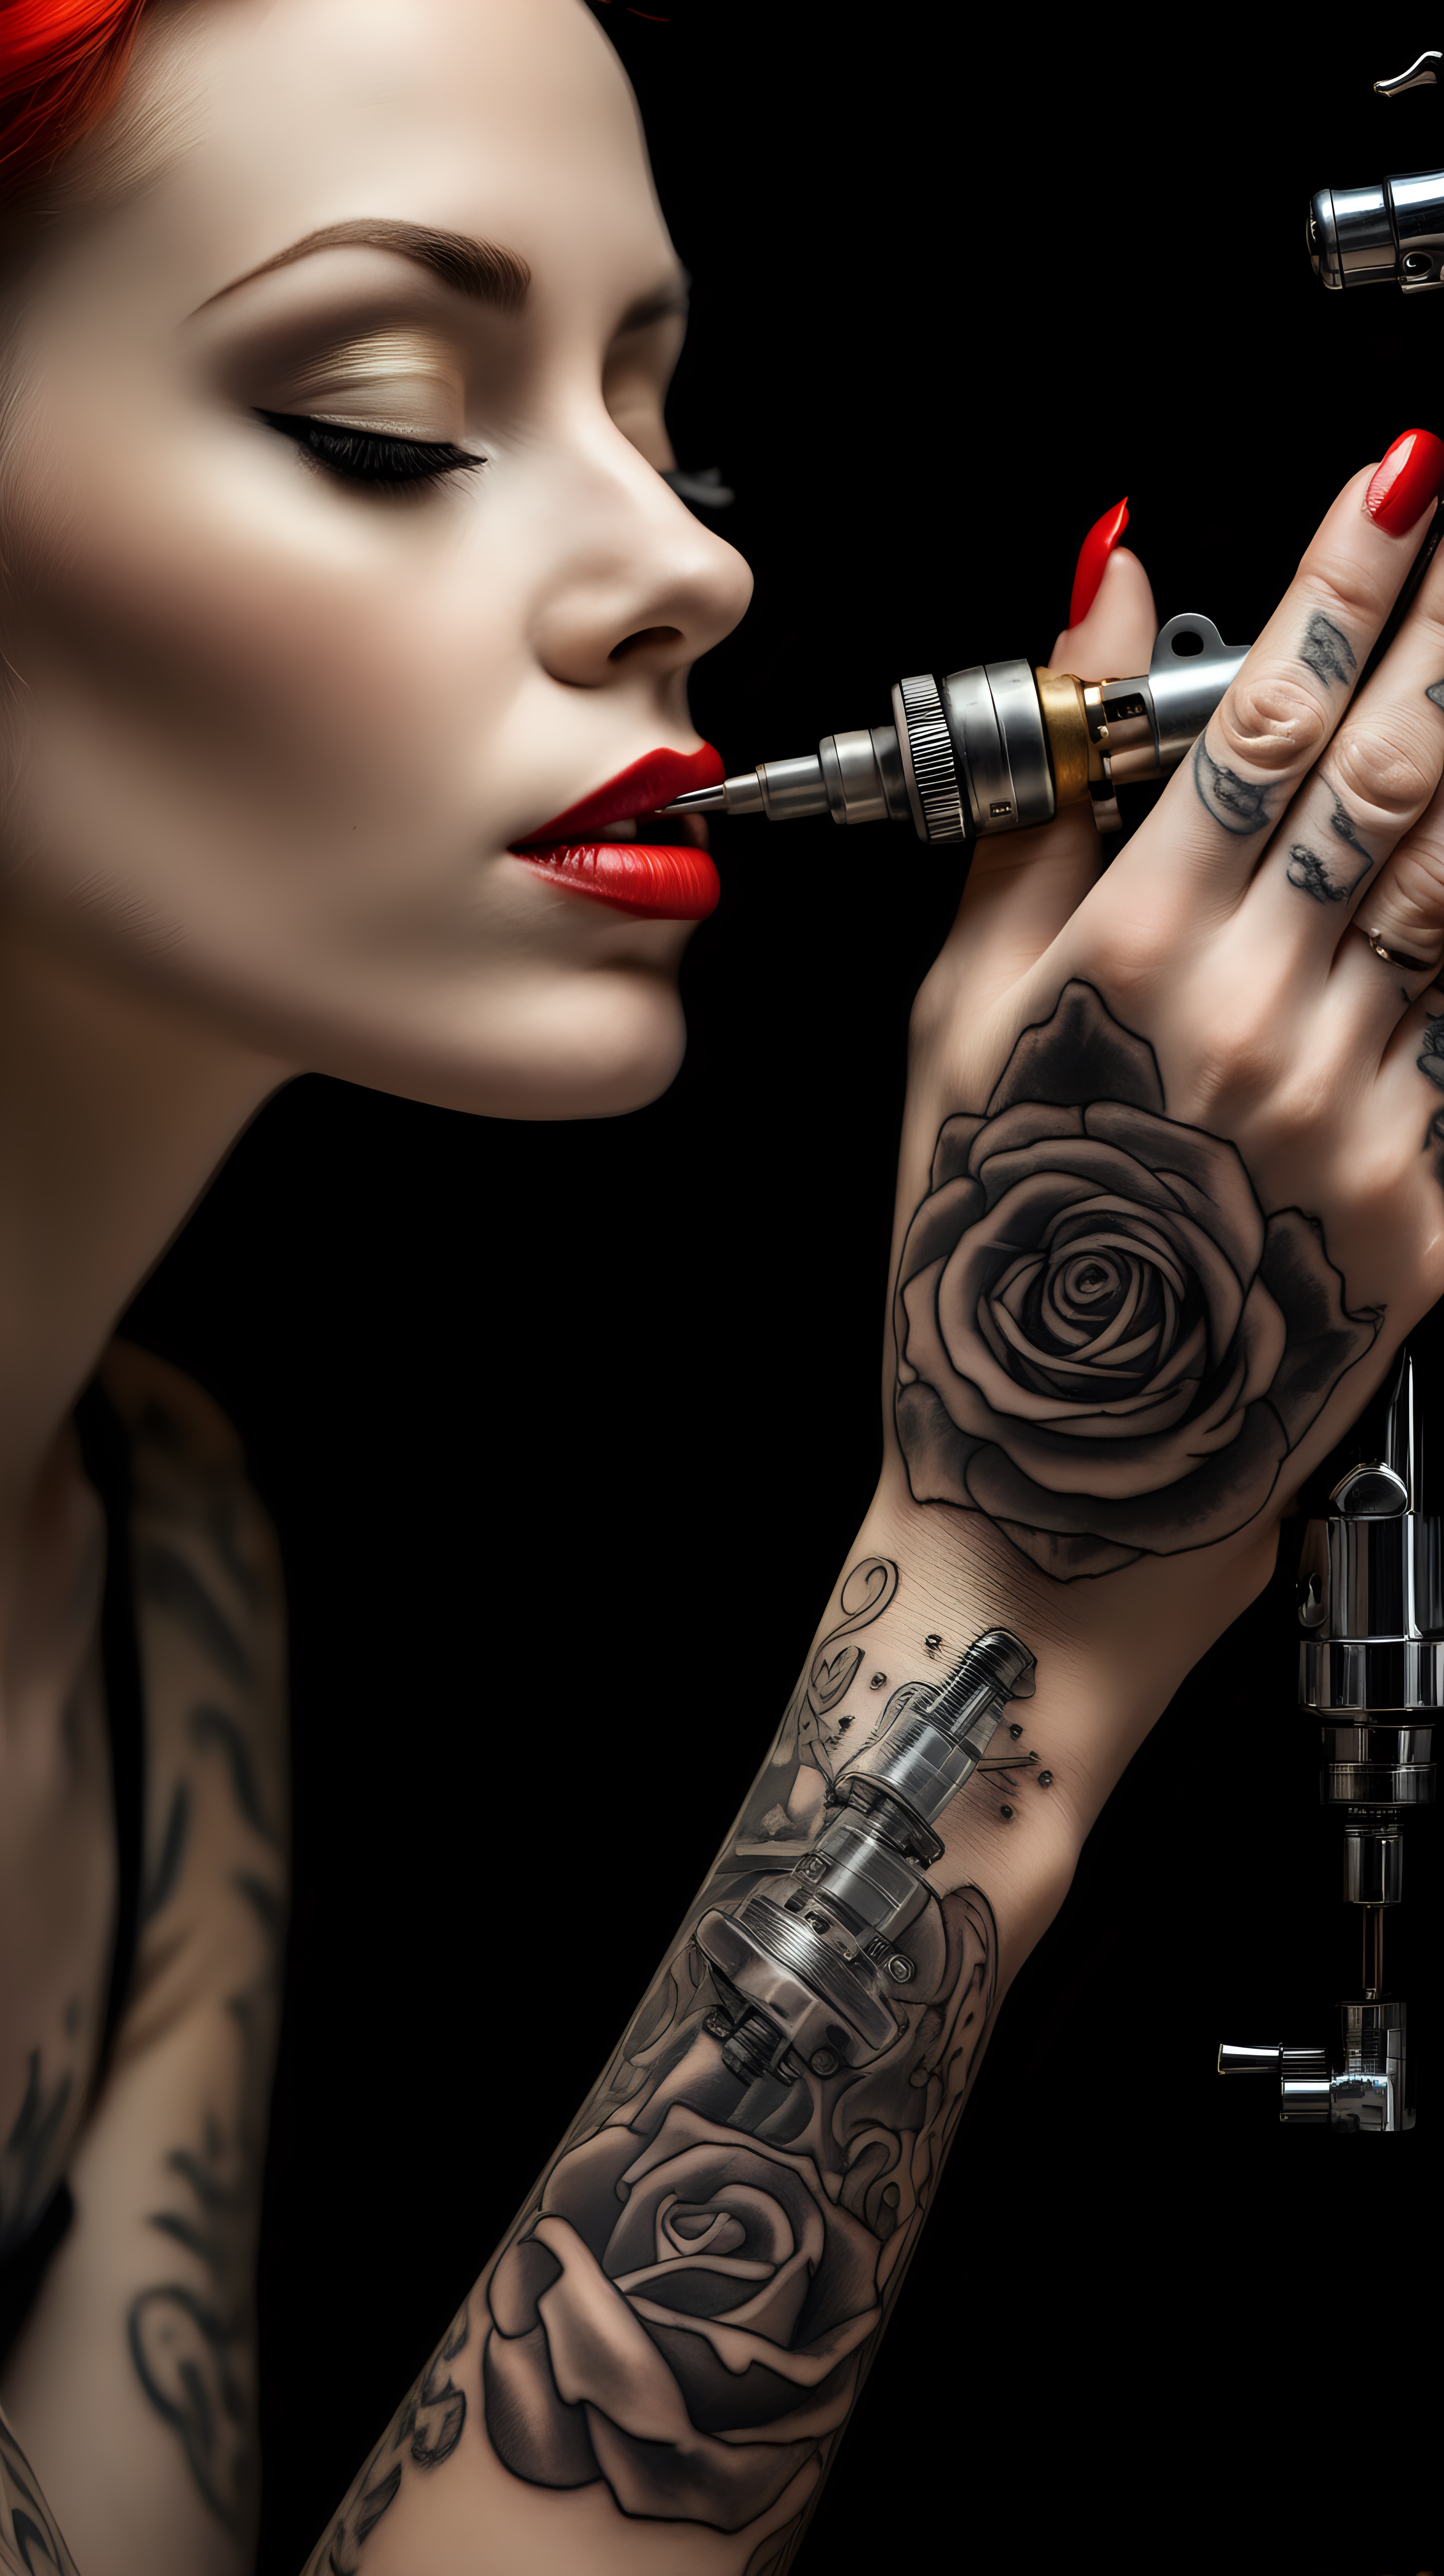 /imagine prompt : An ultra-realistic photograph captured with a canon 5d mark III camera, equipped with an macro lens at F 5.8 aperture setting, The camera is directly in front of the subject, capturing a vintage classic tattoo machine /describe : a pattern of the skull is engraved on golden tattoo grip , grabbed by a hand wearing black nitrile gloves . A beautiful woman whose only lips are visible in the picture is sensually kissing the needle of the tattoo machine with her very red lips.
the hand is blurred and the focus sets on tattoo machine .
Soft spot light gracefully illuminates the subject and golden grip is shining. The background is absolutely black , highlighting the subject.
The image, shot in high resolution and a 16:9 aspect ratio, captures the subject’s  with stunning realism –ar 9:16 –v 5.2 –style raw
